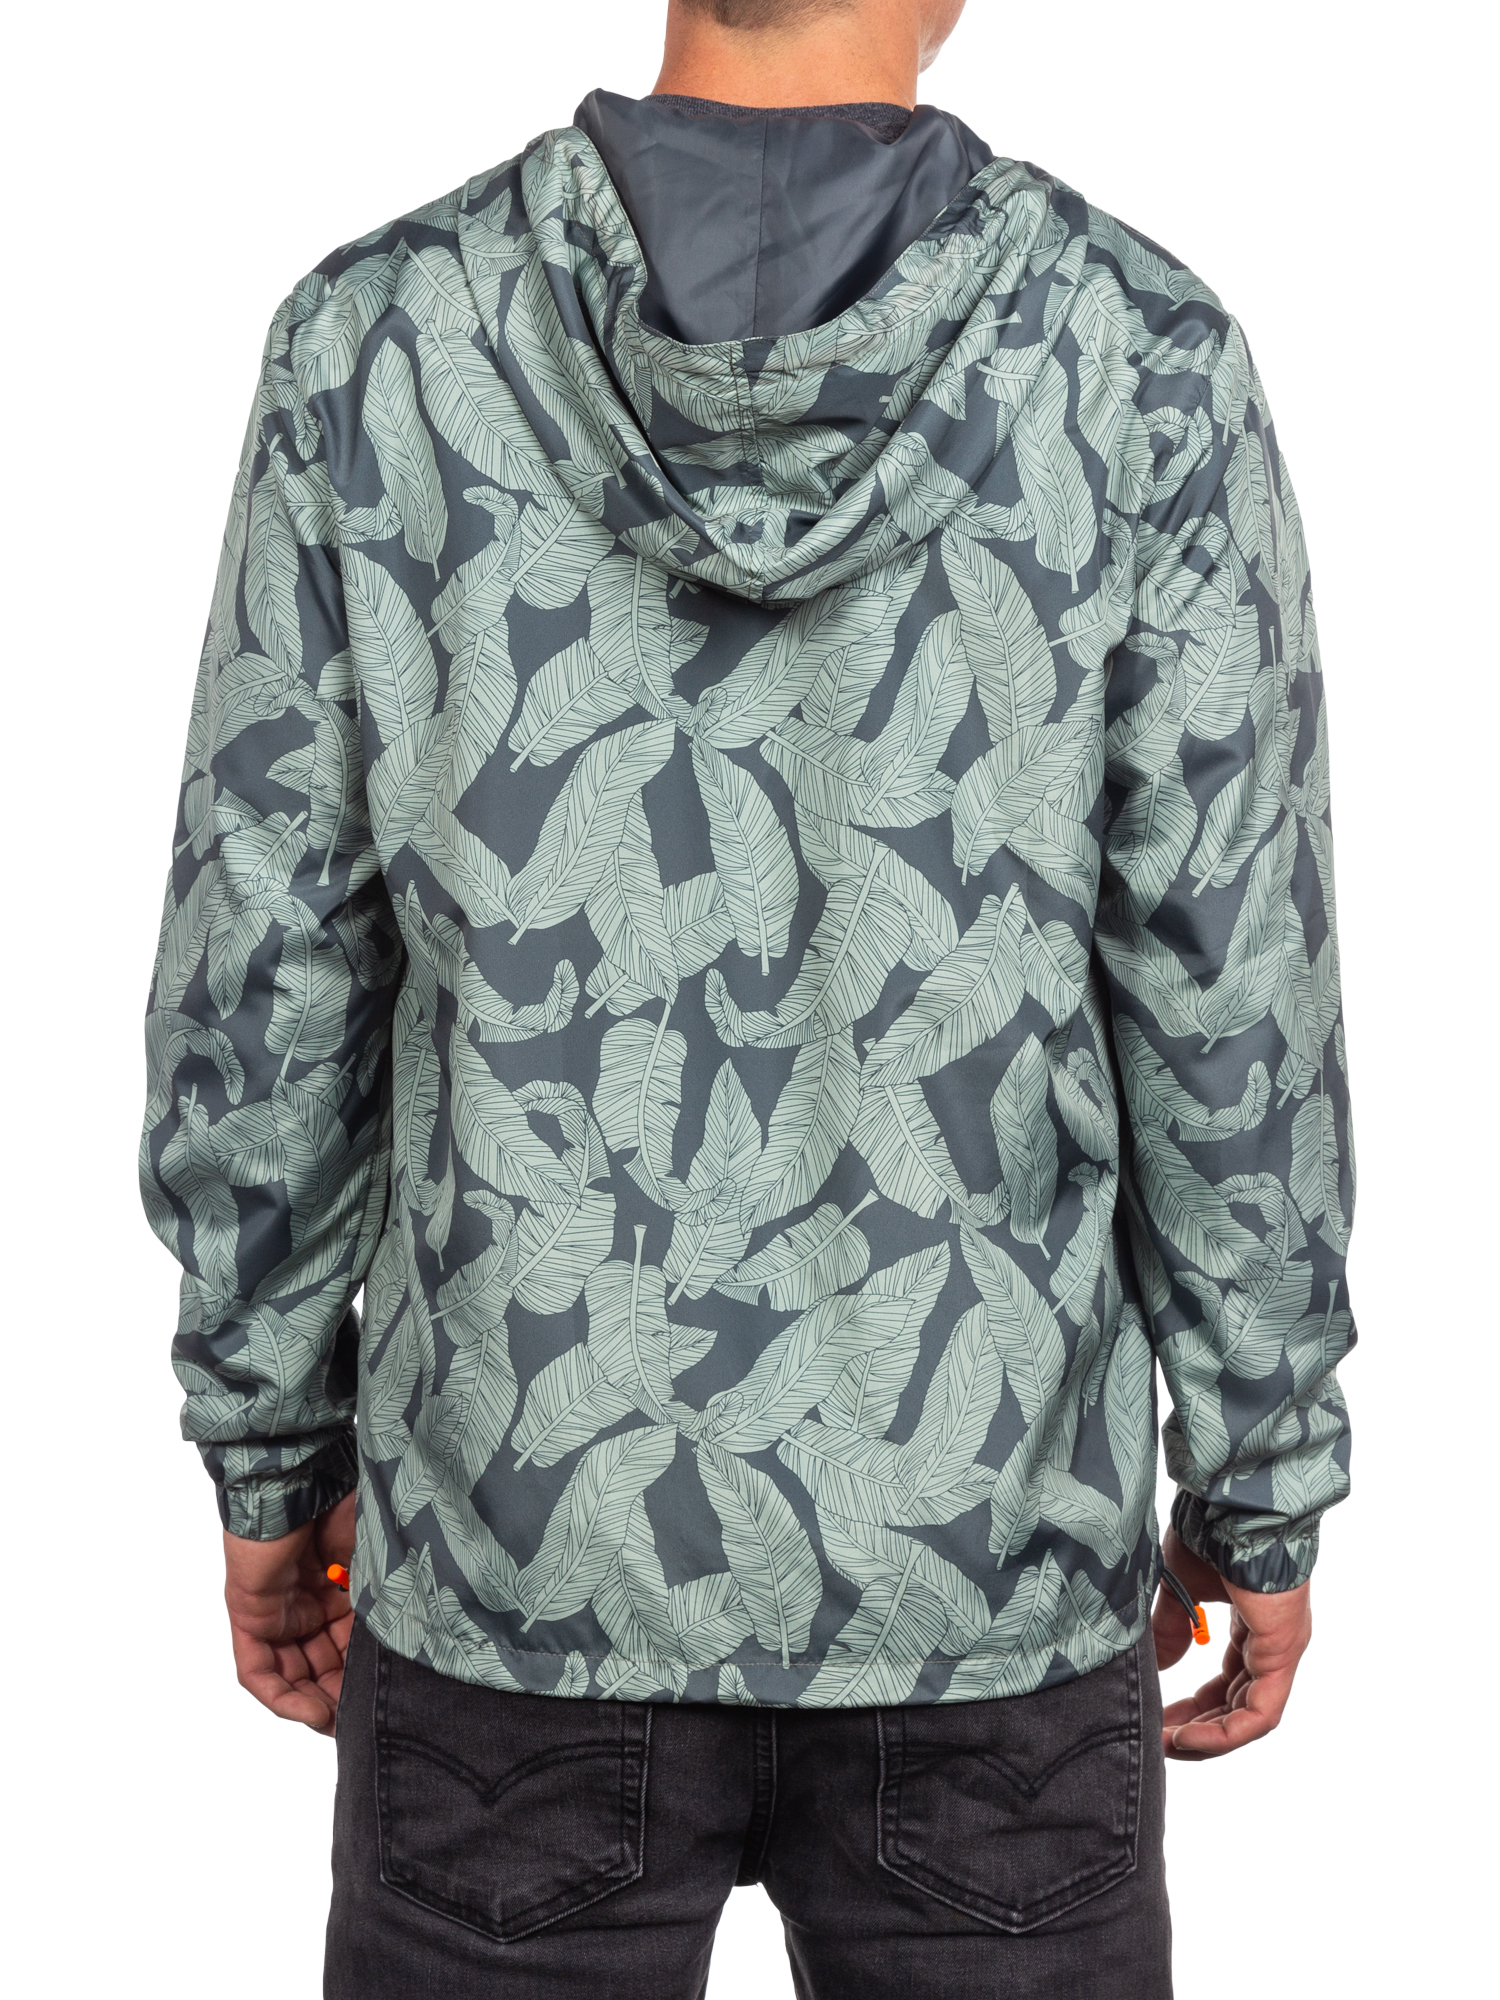 Men's Light Weight Hooded Anorak, up to Size 3XL - image 2 of 2